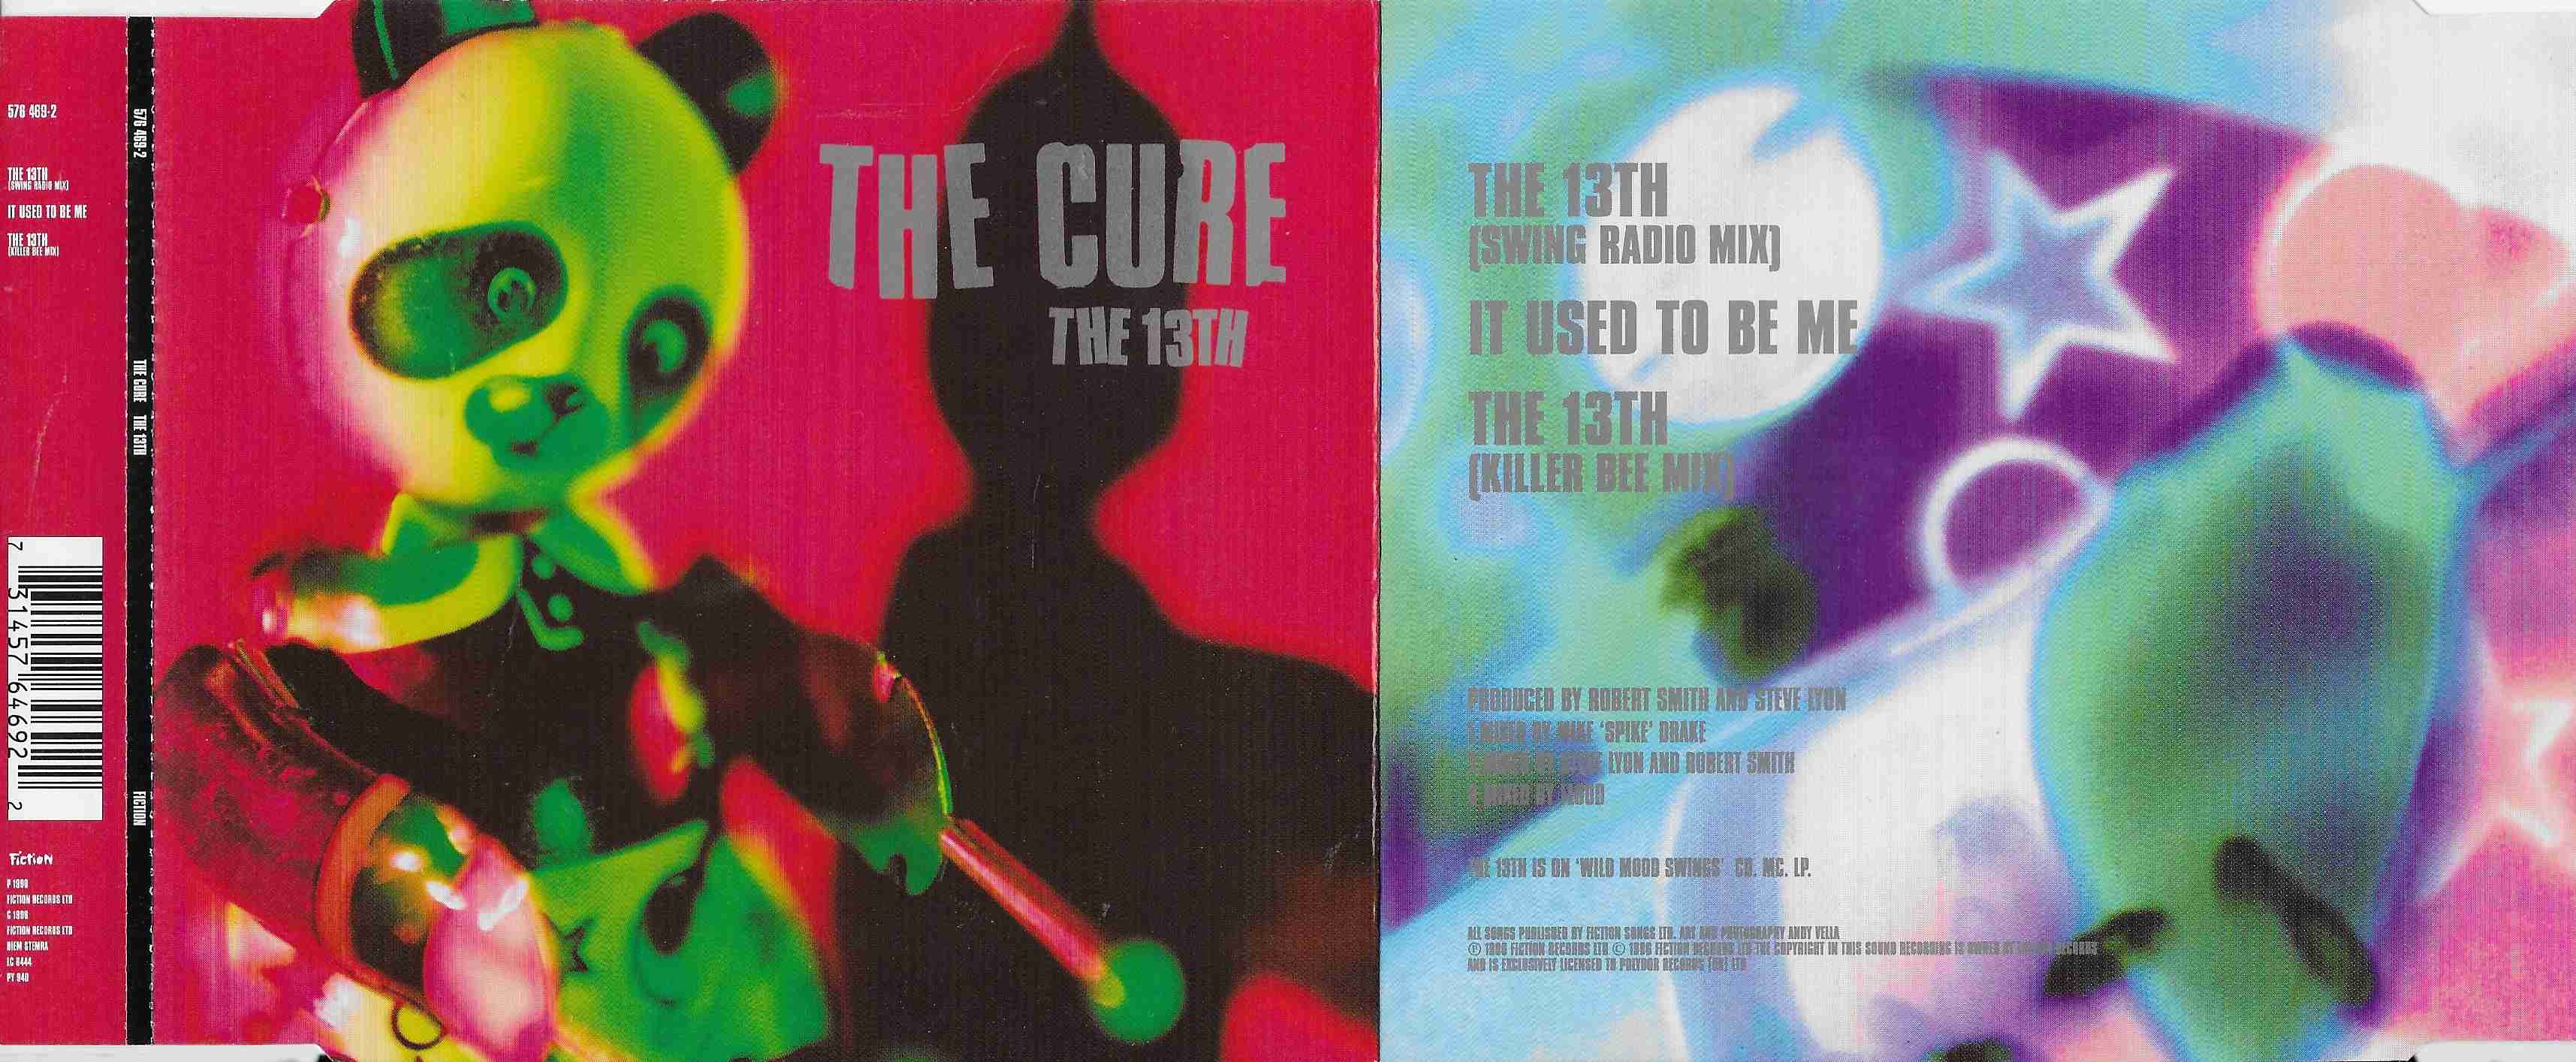 Picture of 576469 - 2 The 13th by artist The Cure 